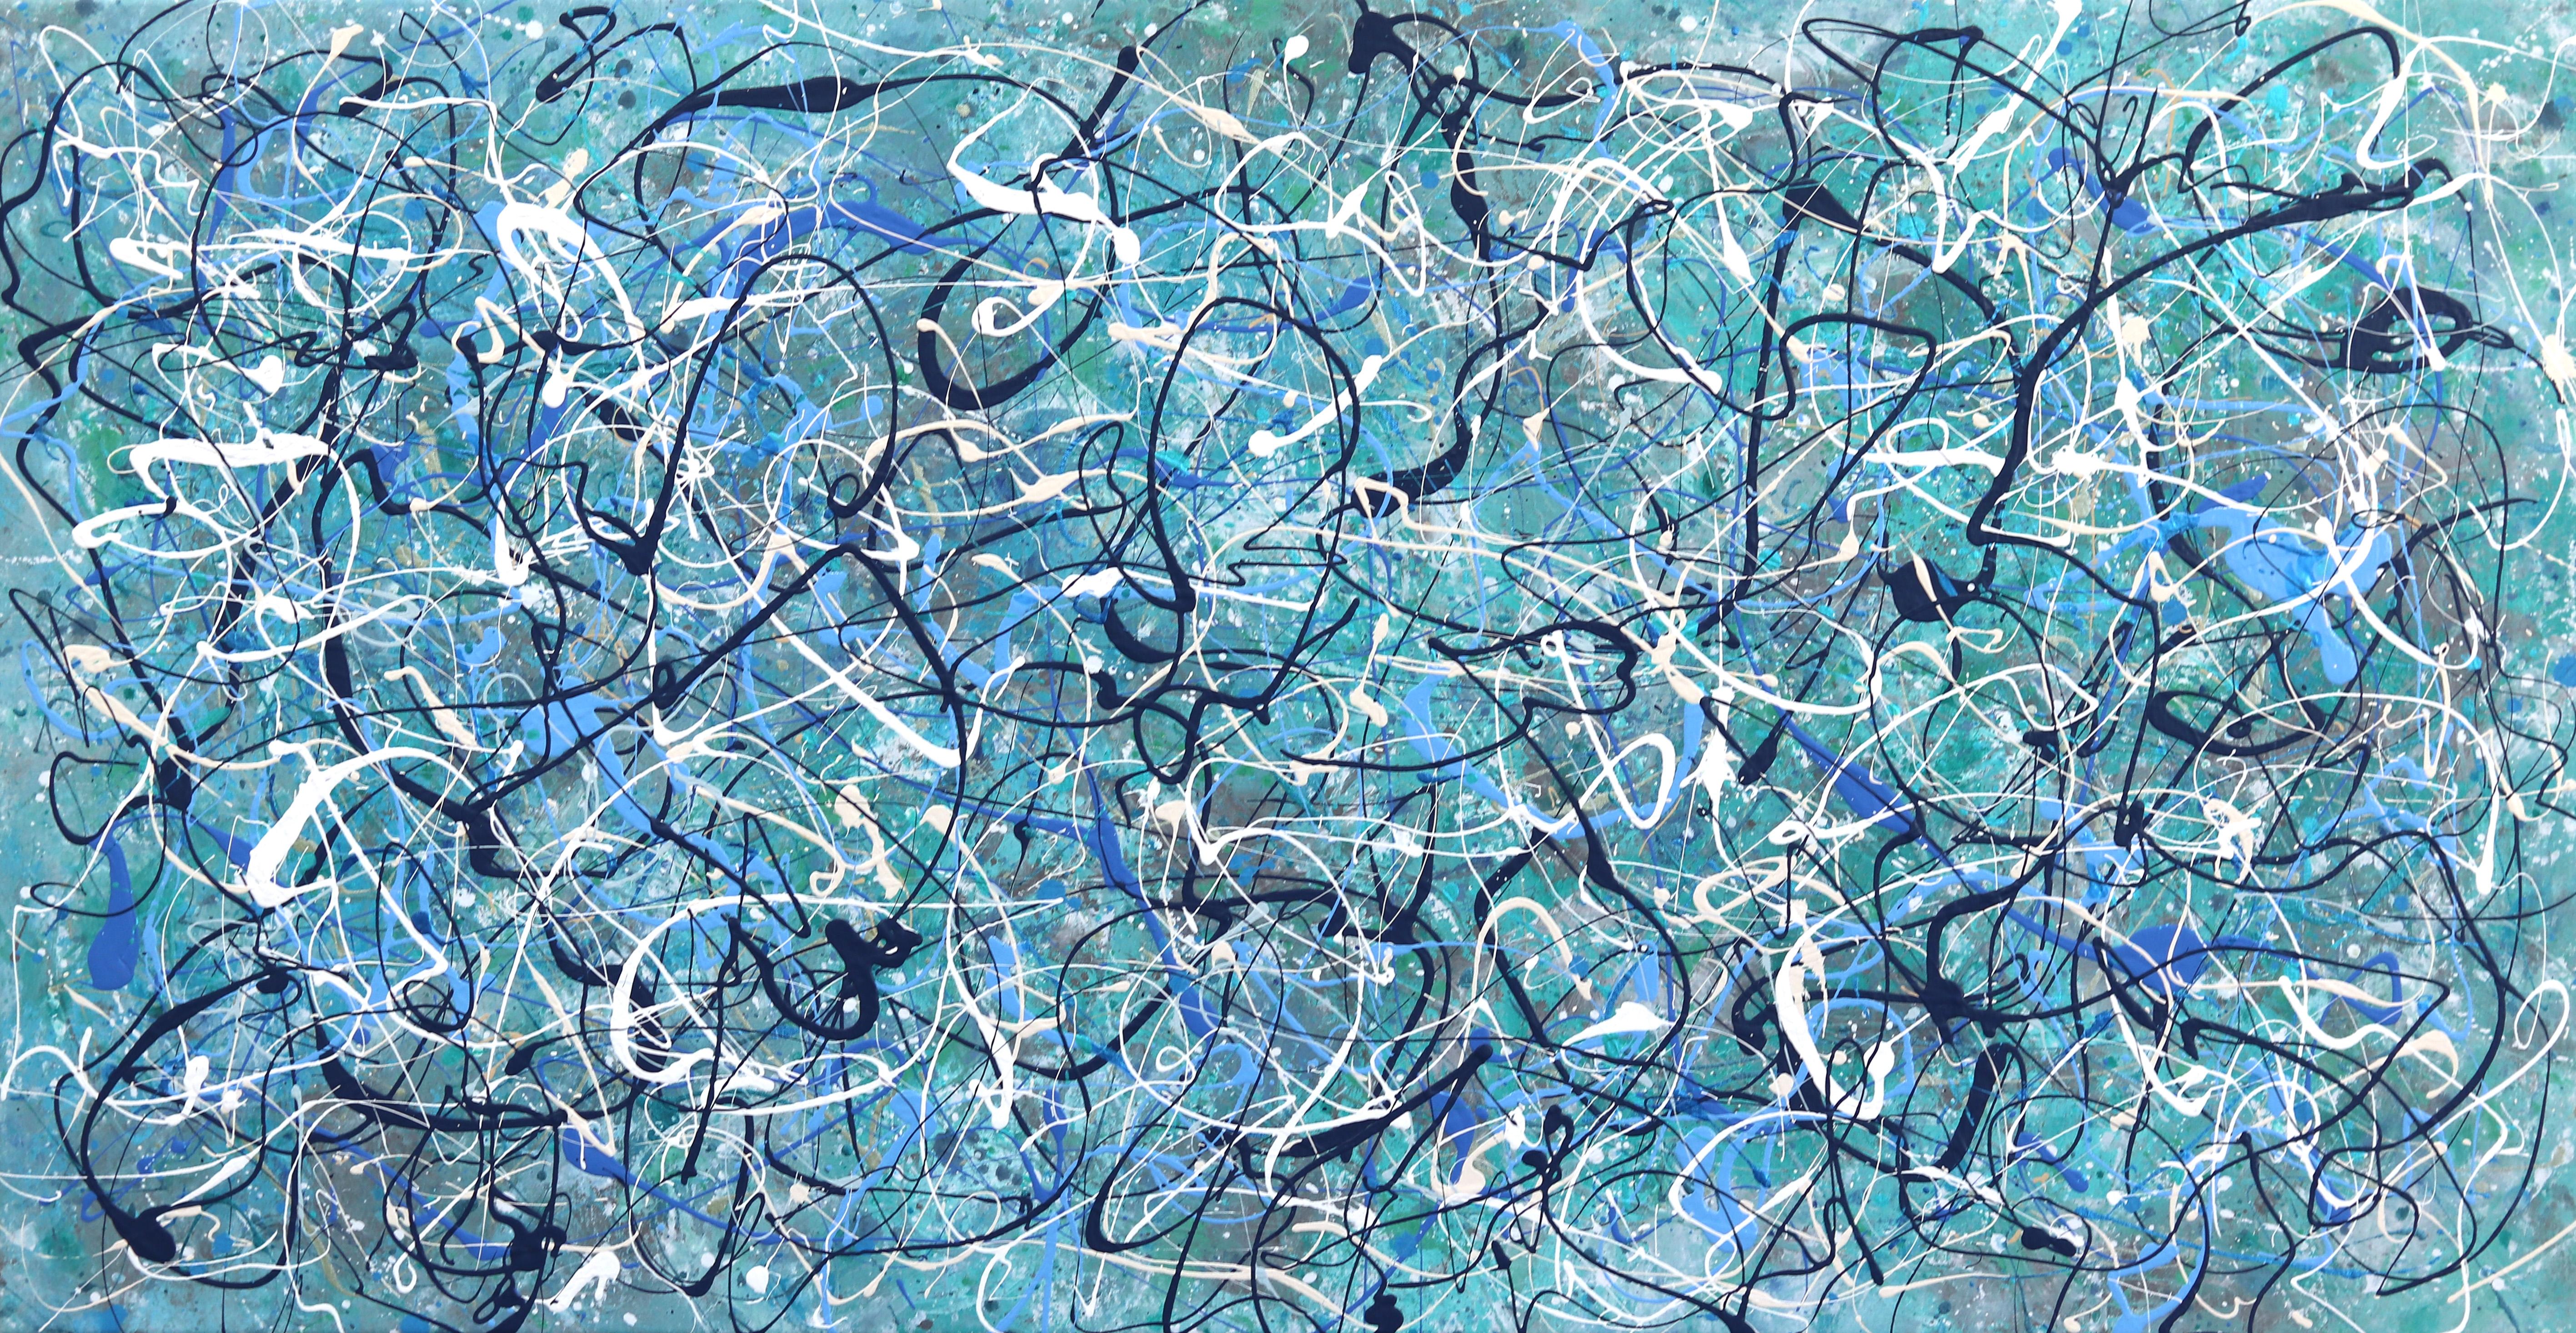 Rhythm in Blue - Unique Abstract Expressionist Original Painting on Canvas